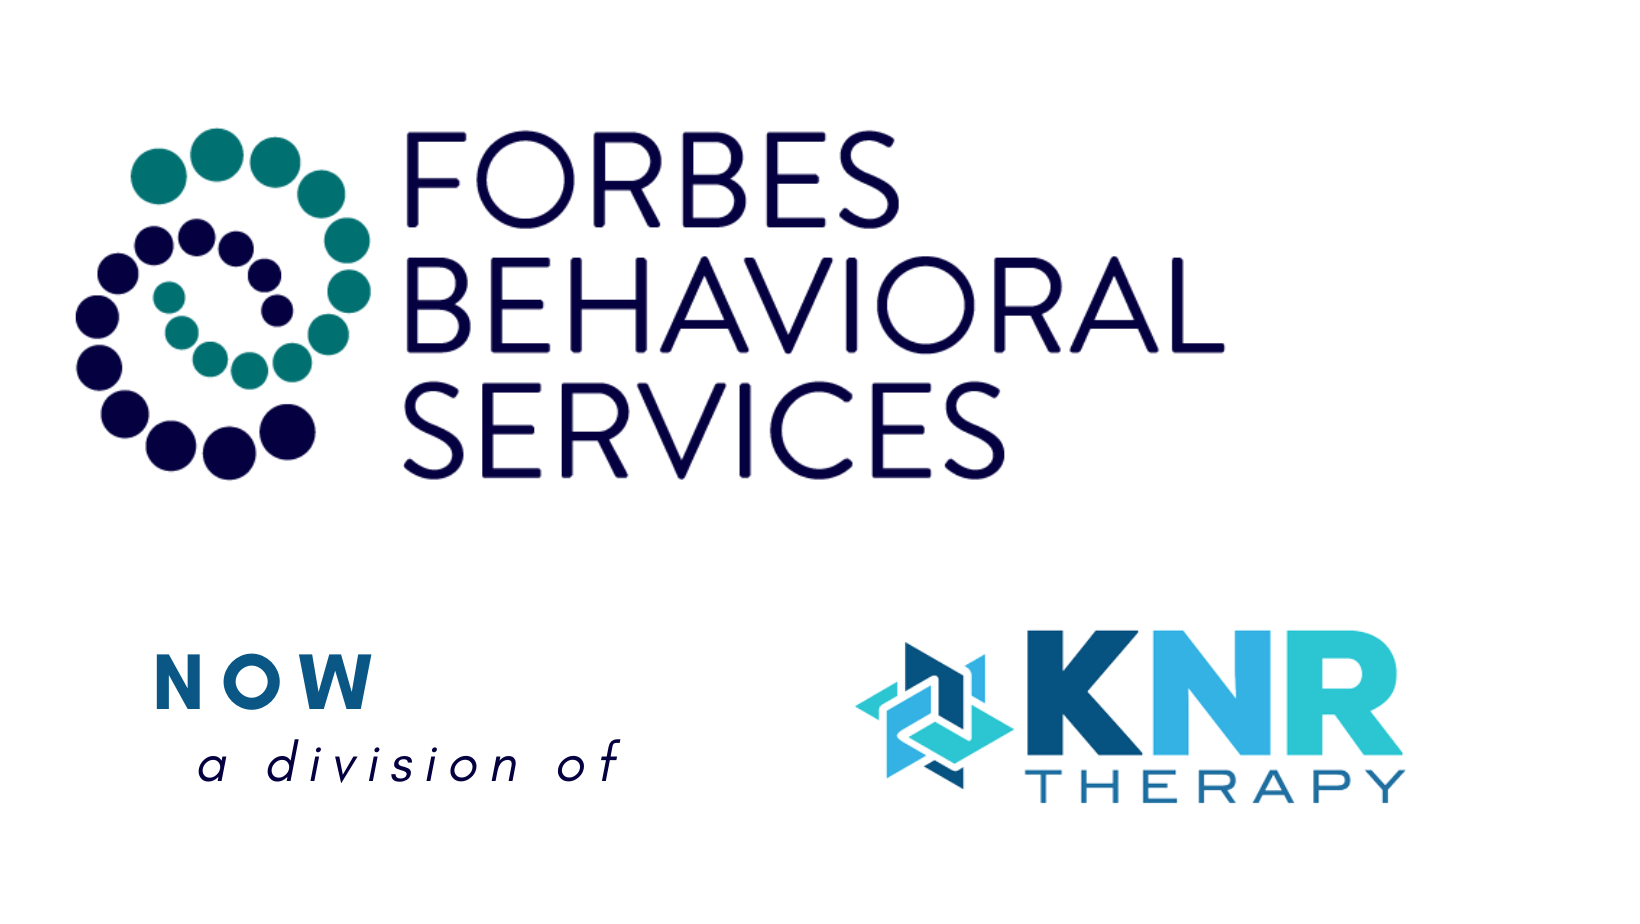 KNR Therapy_press release_forbes behavioral services